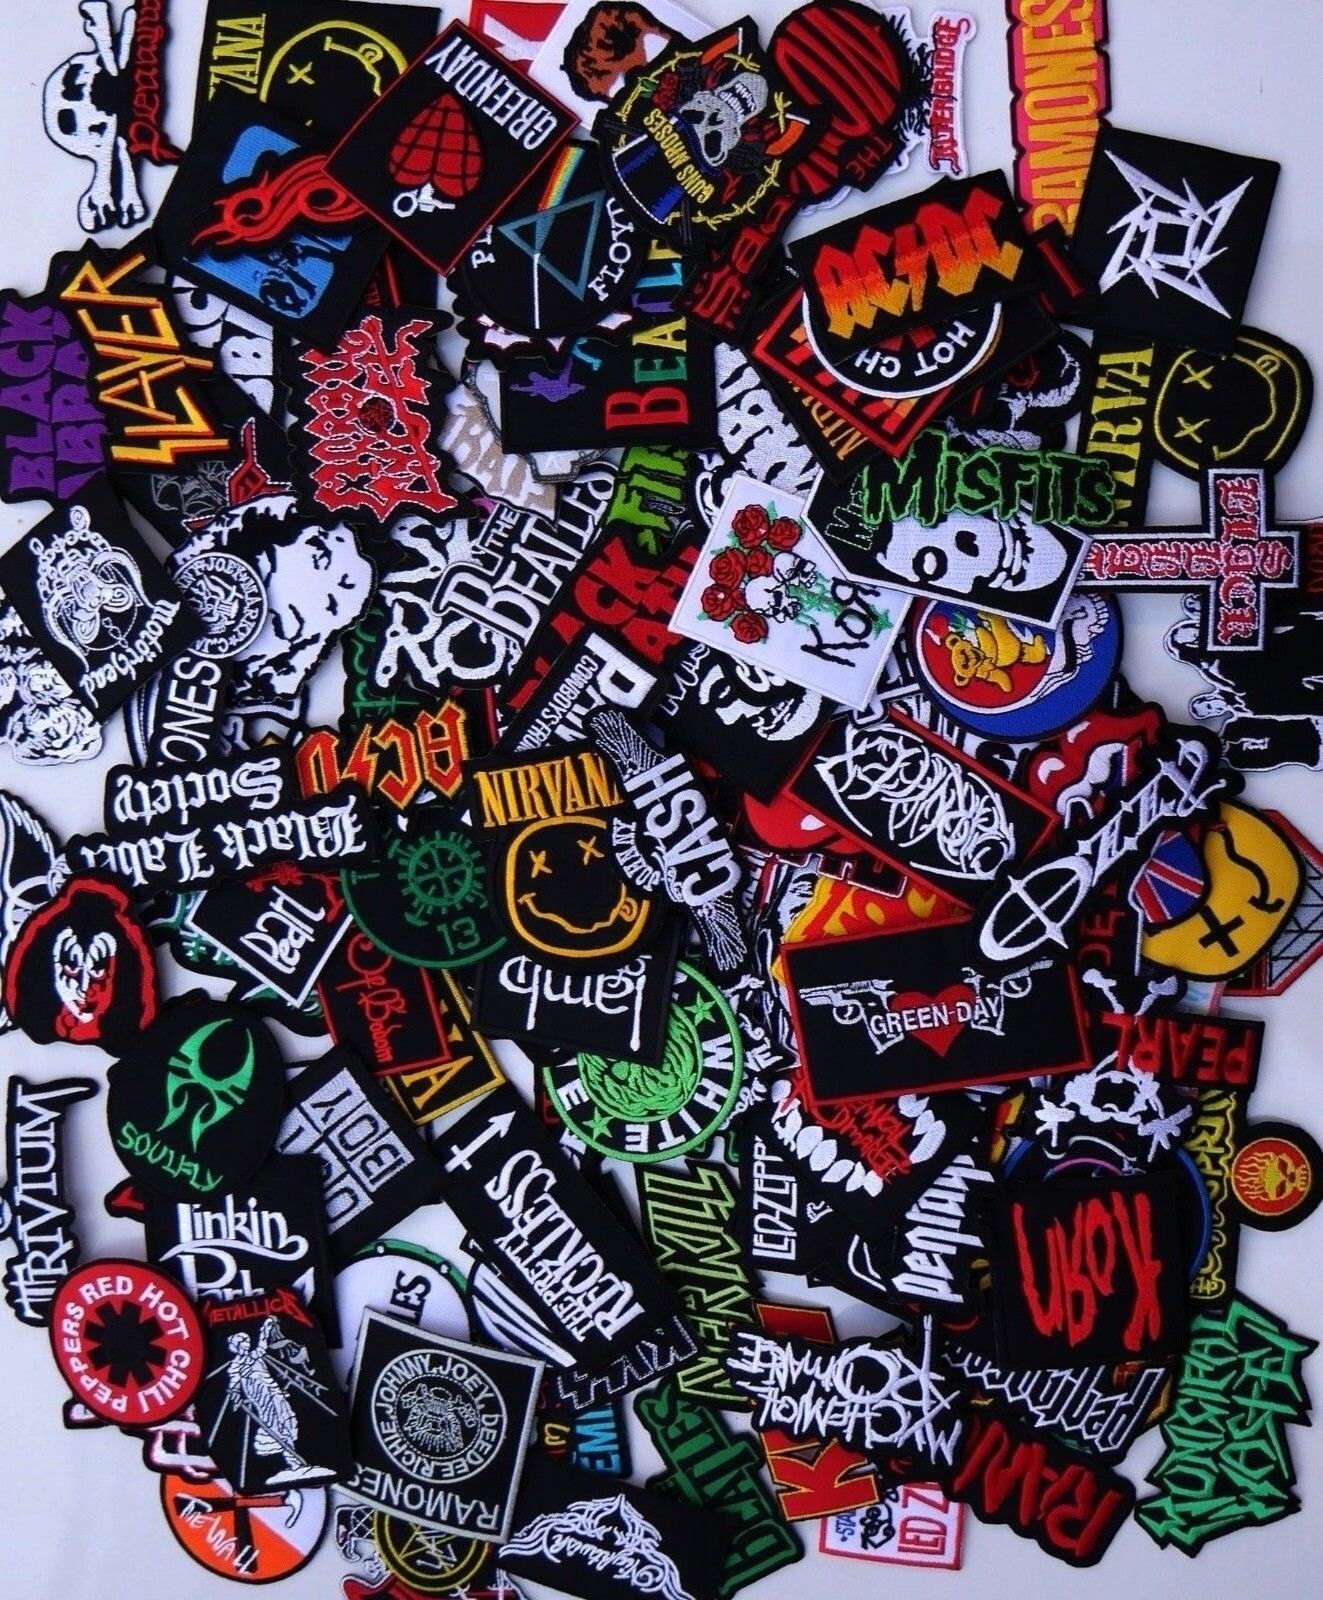 Random Lot of 20 Rock Band Patches Iron on Music Punk Roll Heavy Metal Sew Unbranded Does Not Apply